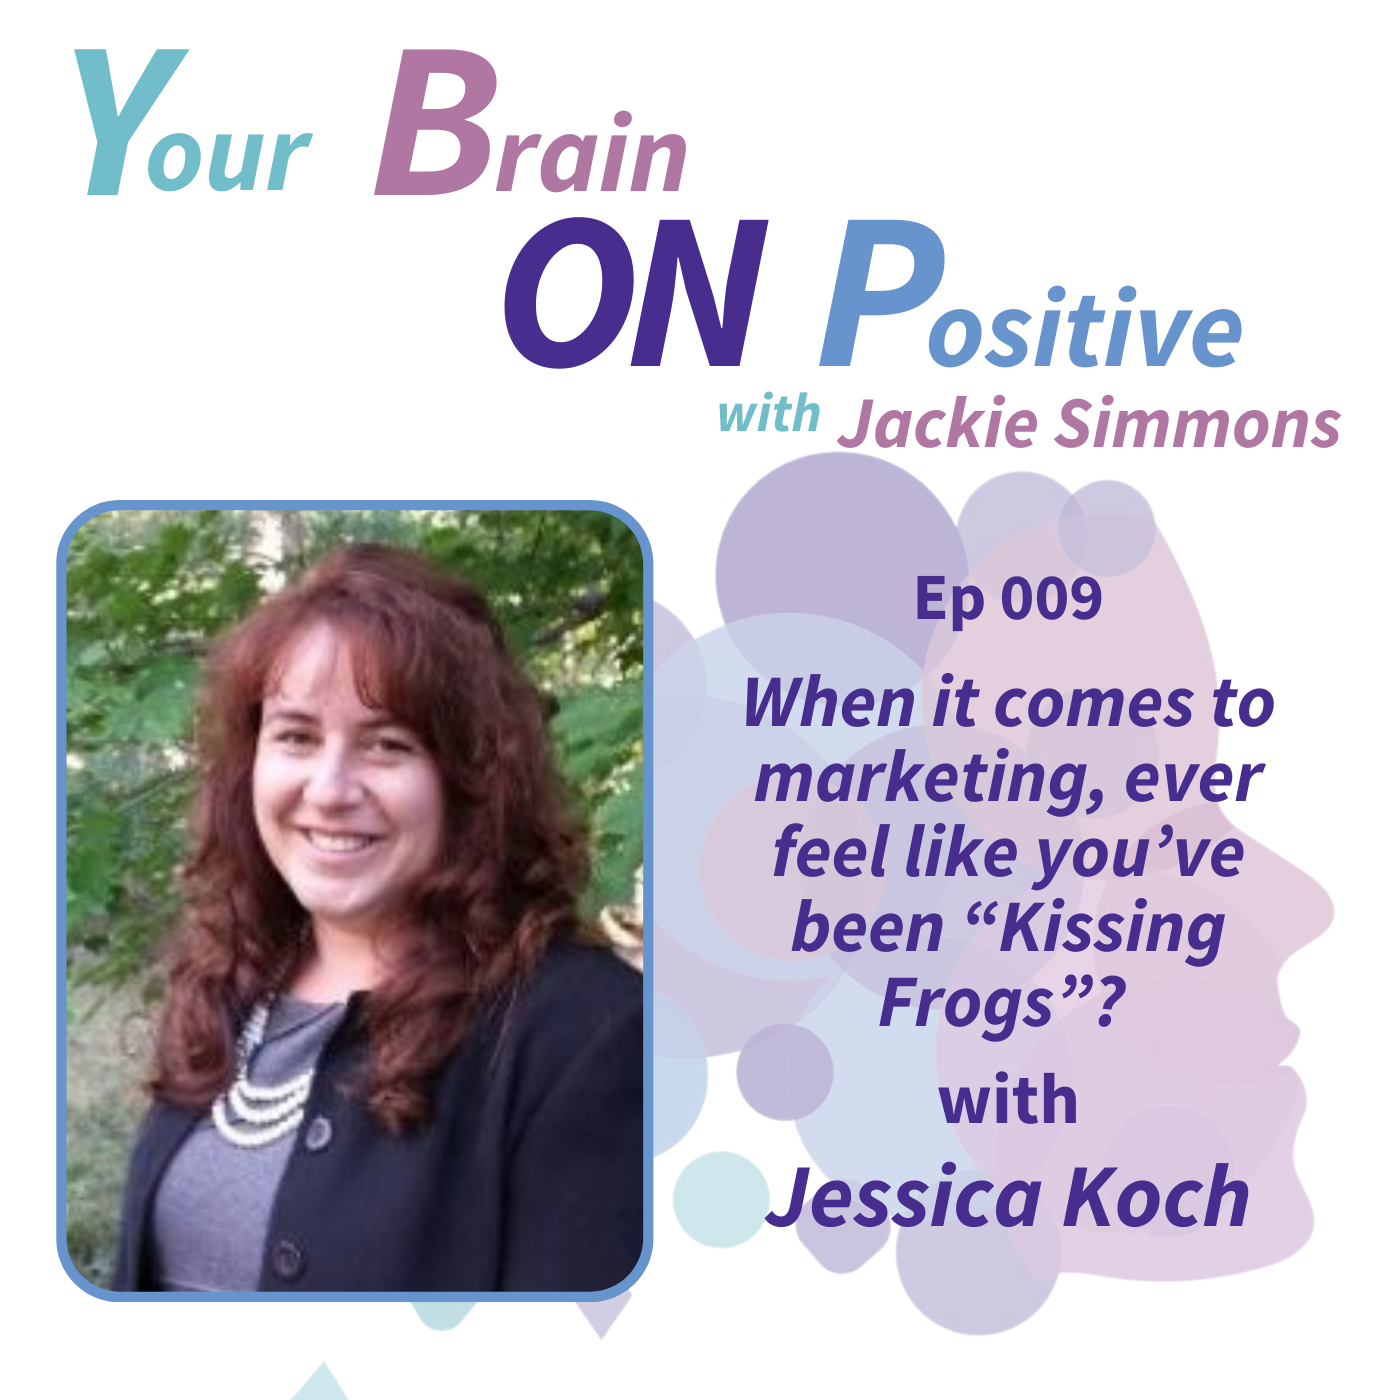 When it Comes to Marketing, Ever Feel Like You’ve Been "Kissing Frogs"? - Jessica Koch